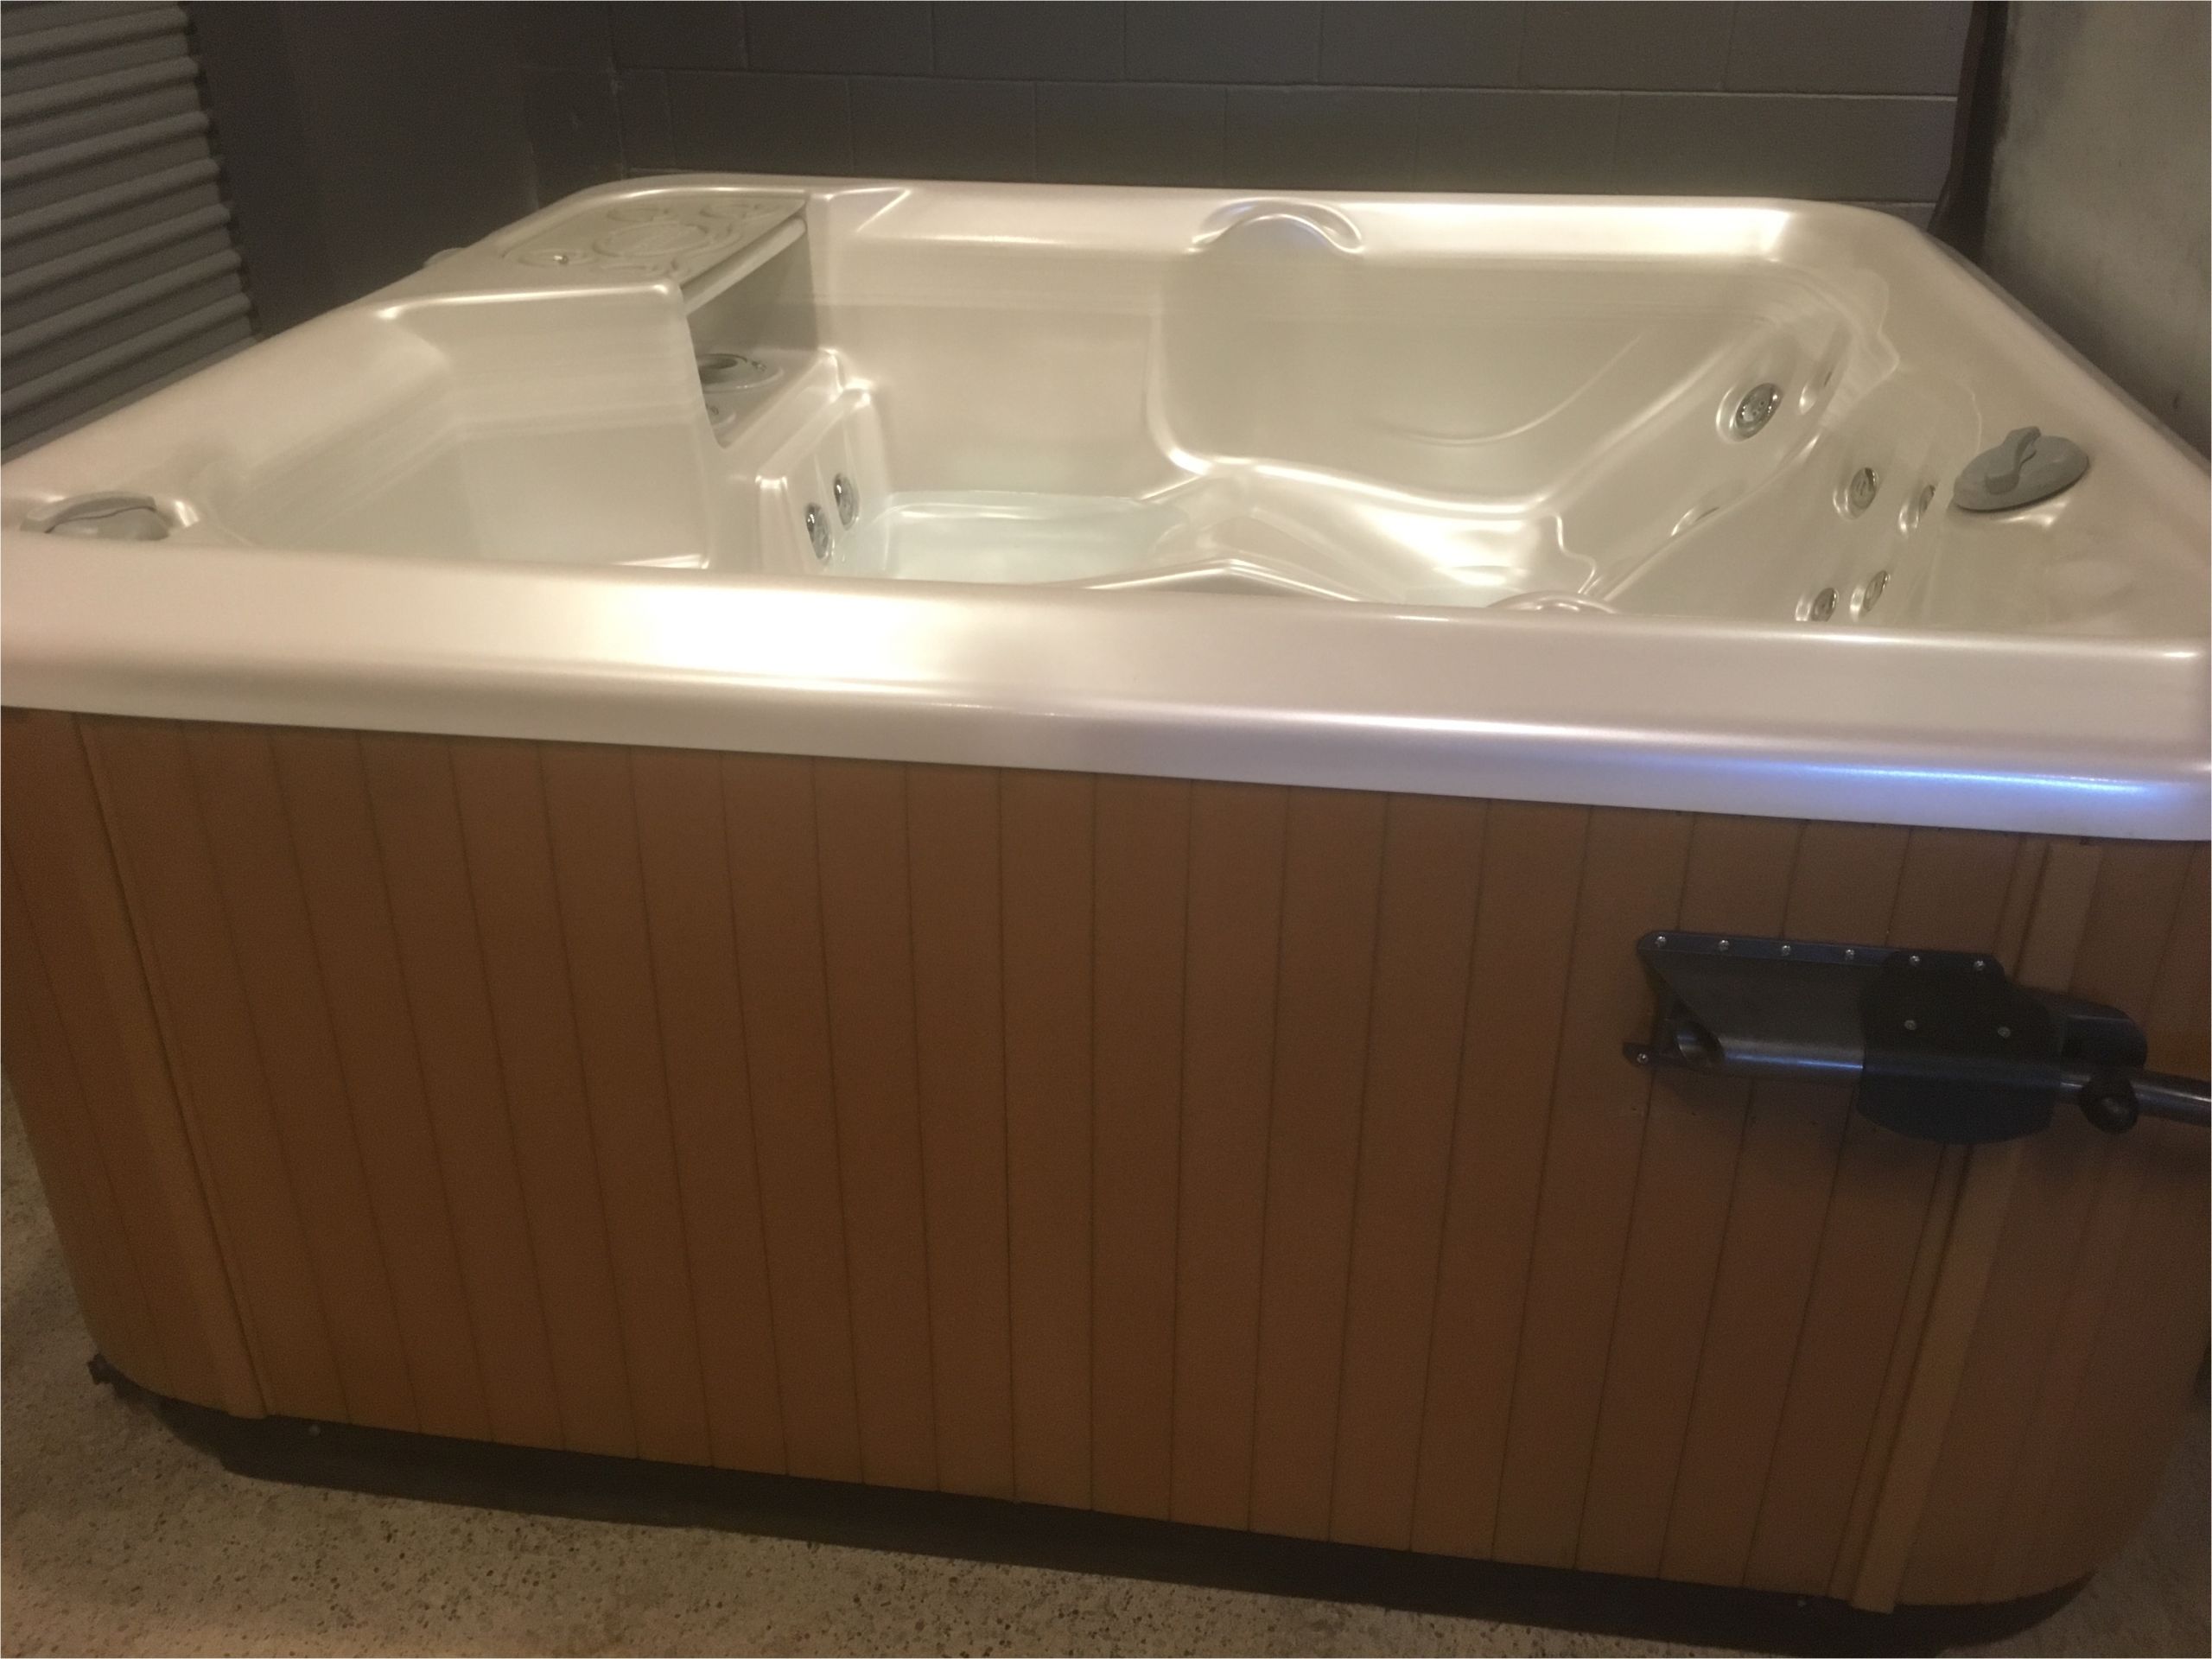 Used Bathtubs for Sale Buy Used Hot Tubs for Sale Best Prices – Factoryhottubs